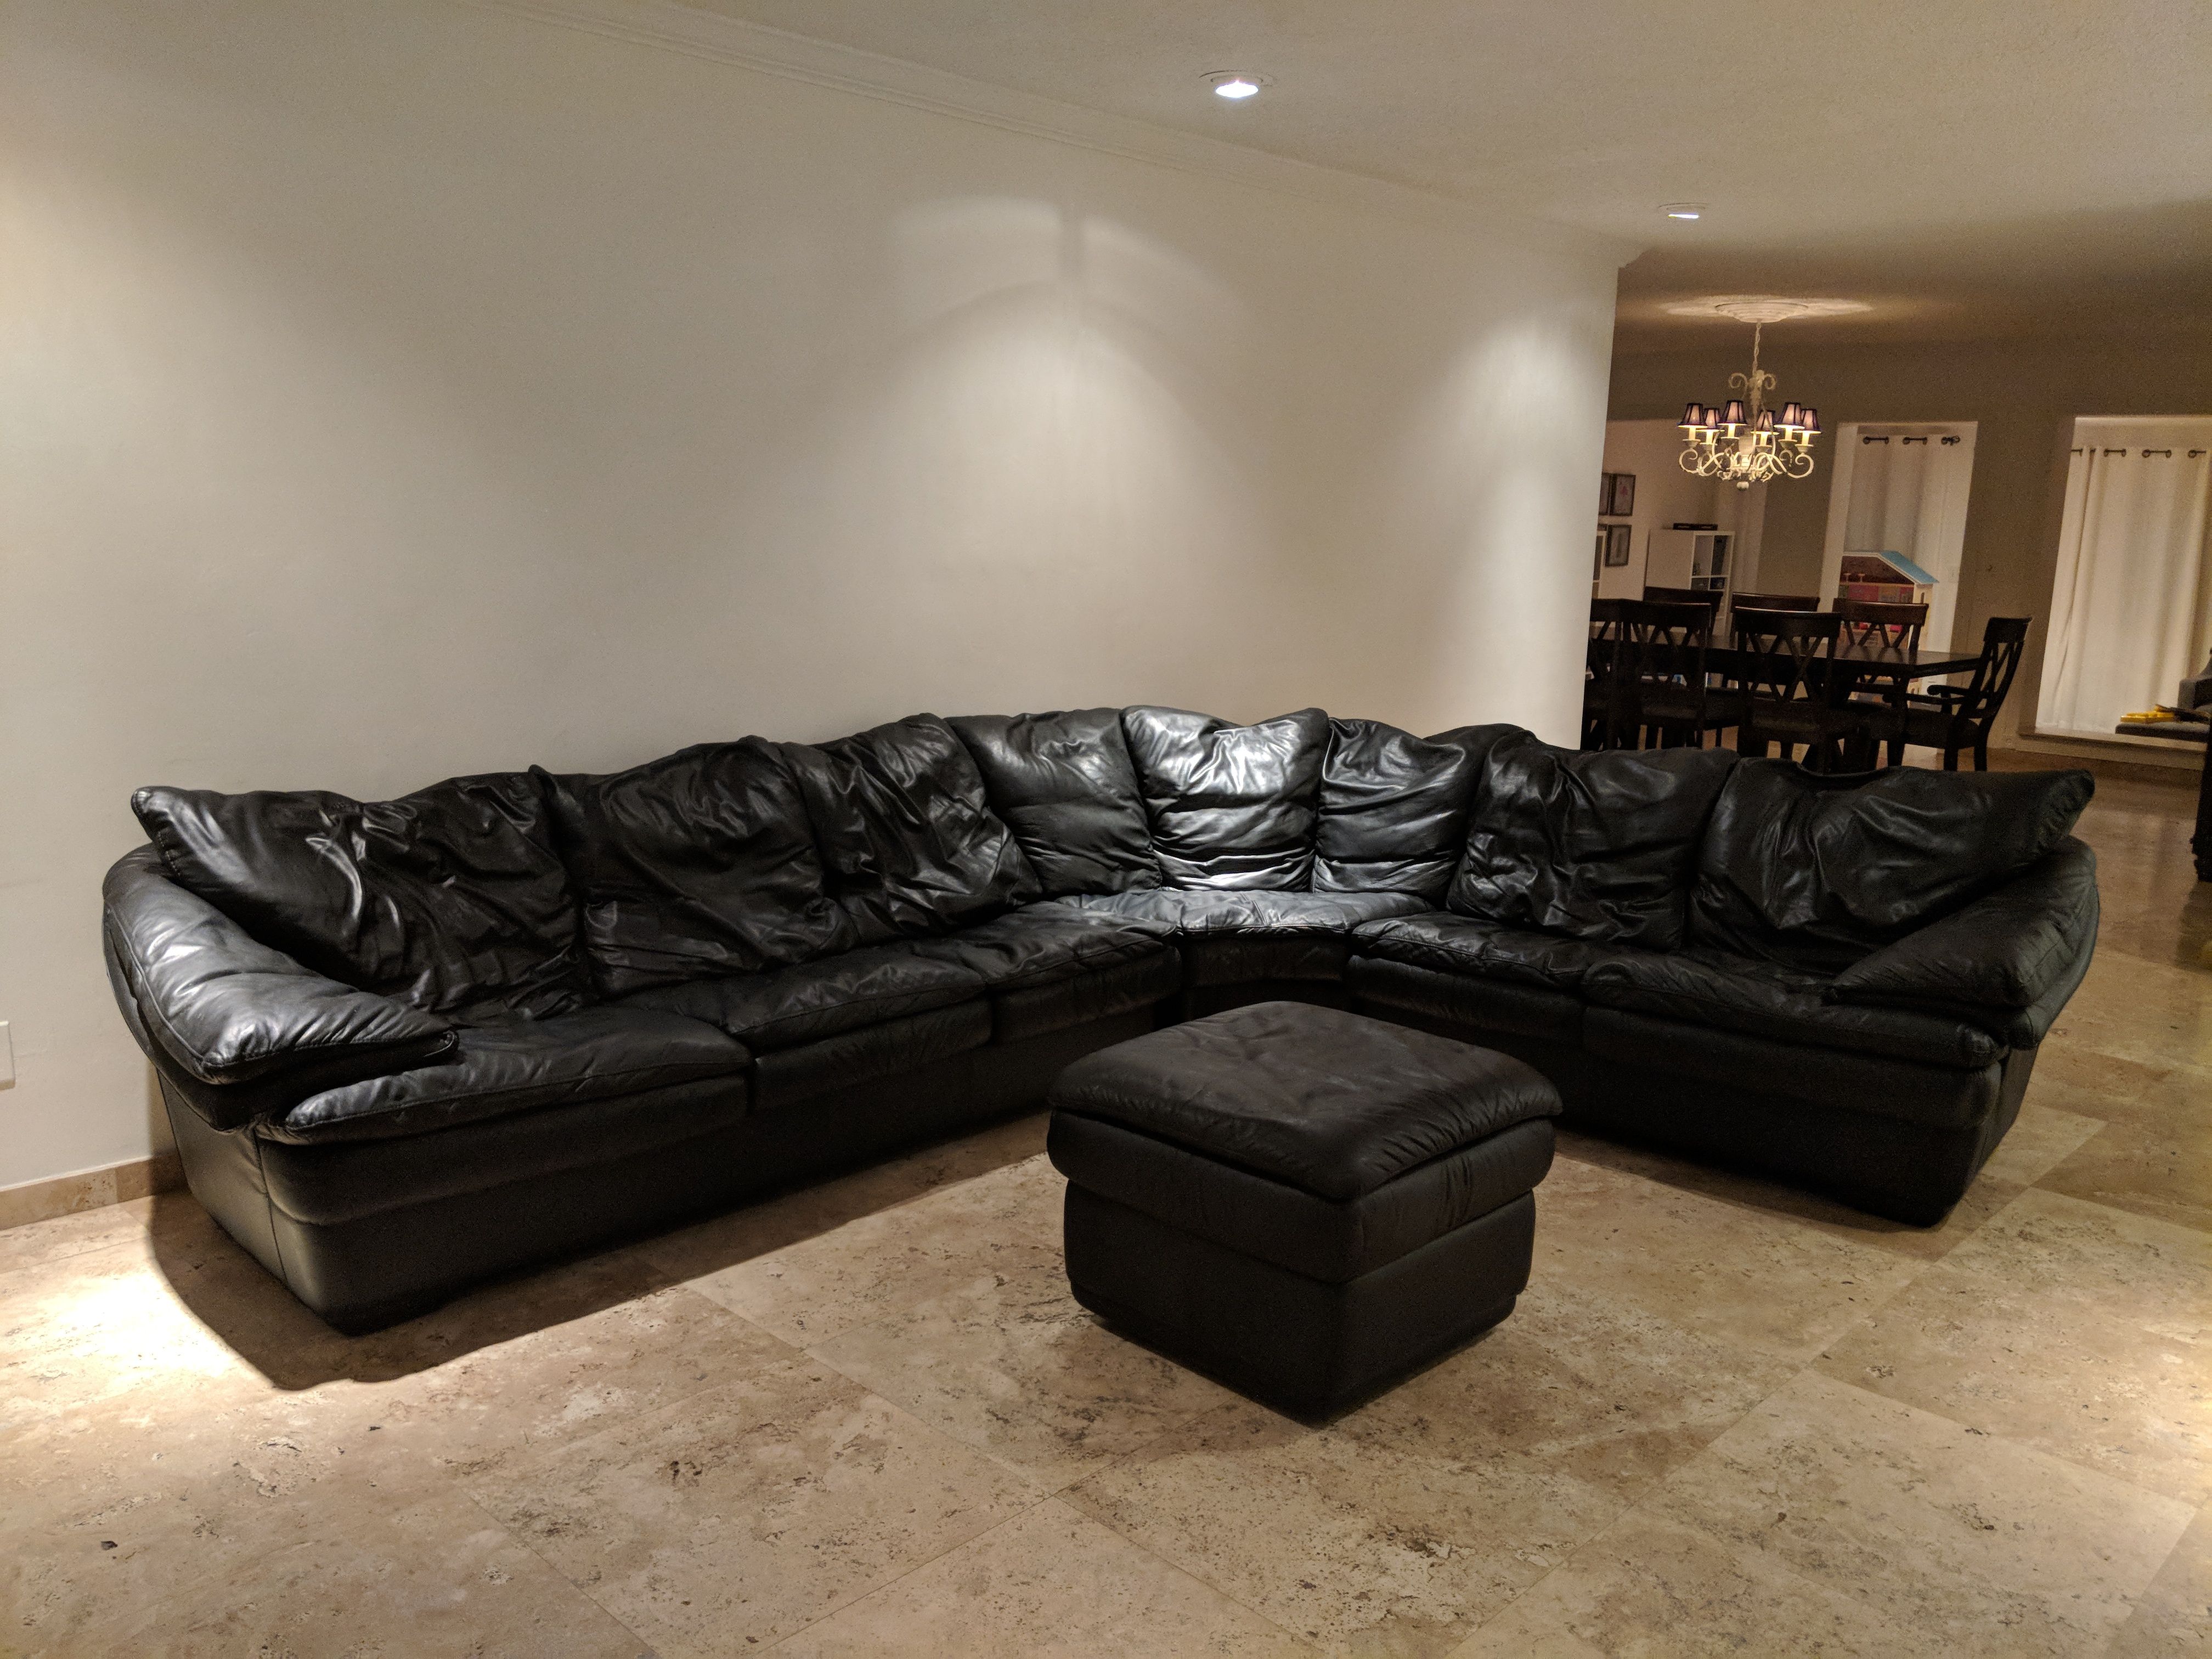 Genuine leather black sectional couch with ottoman - great condition!